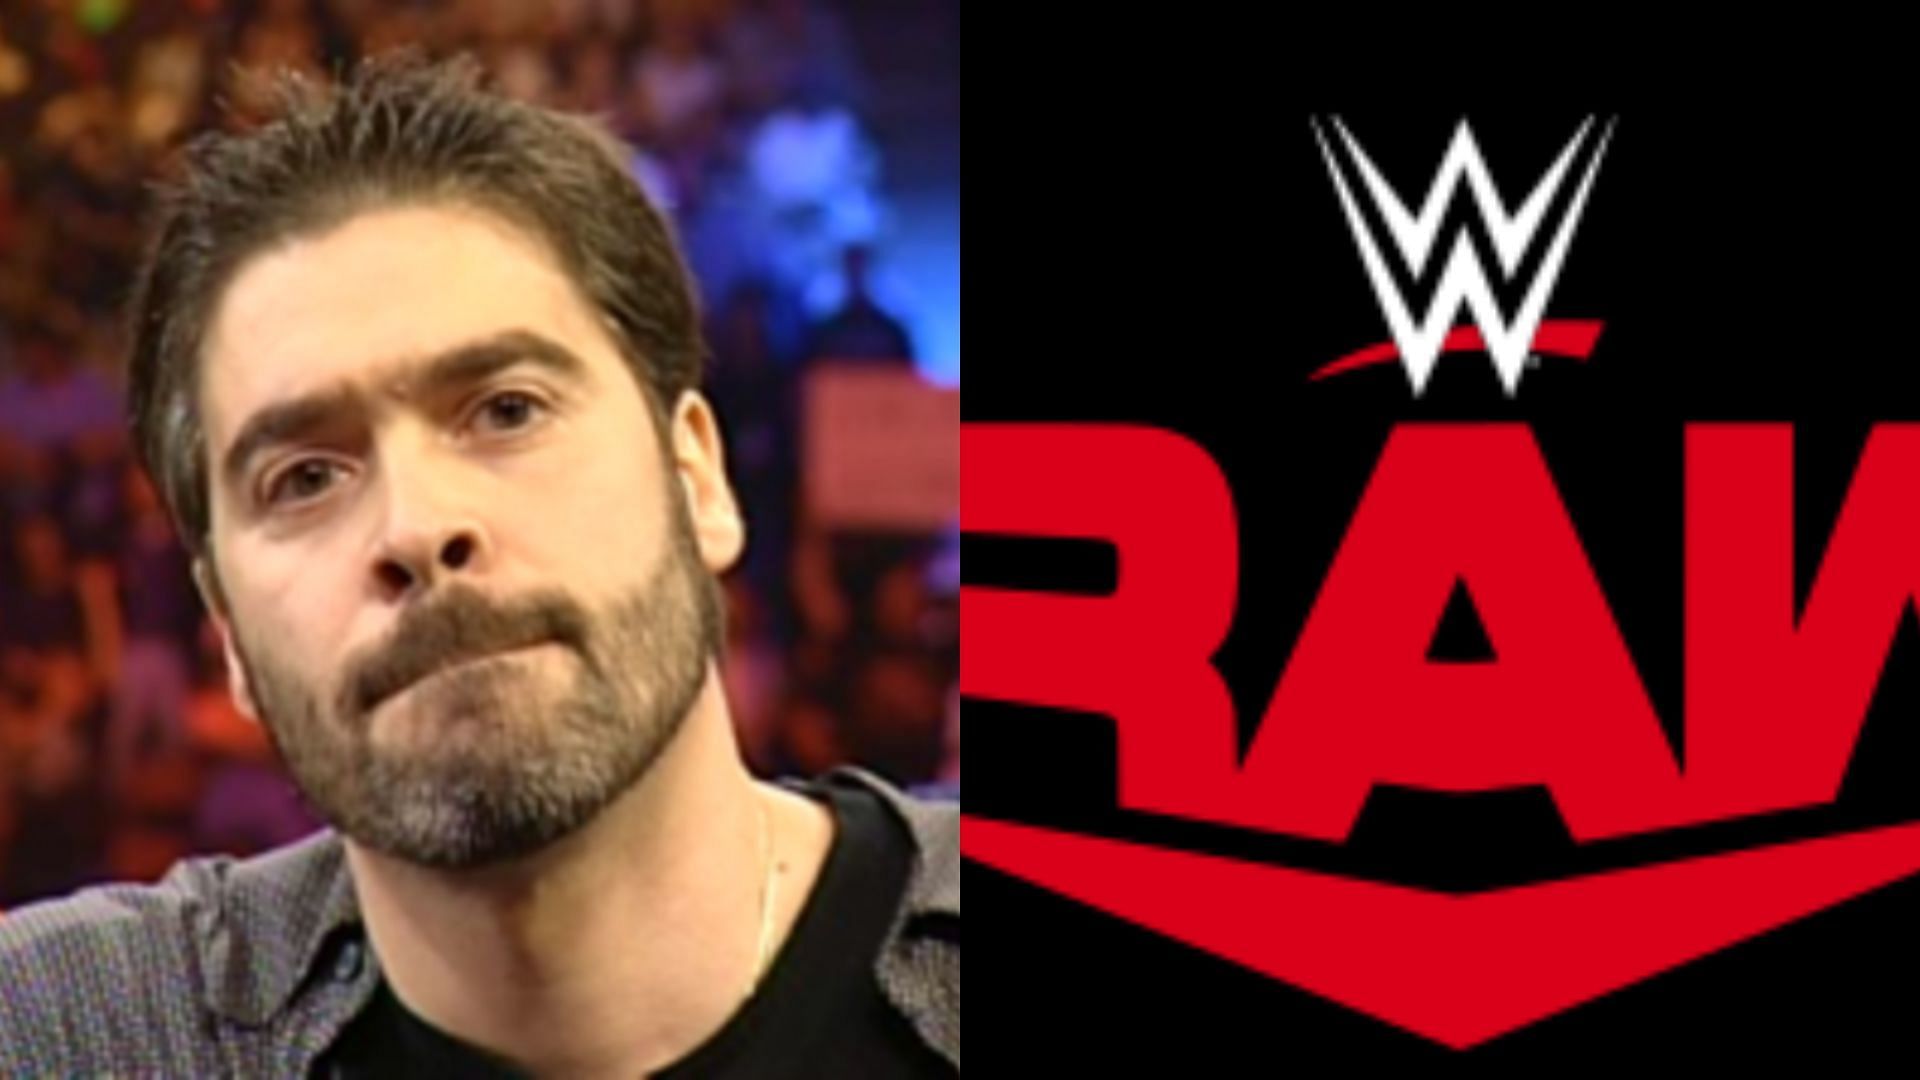 Vince Russo was former head writer of WWE RAW